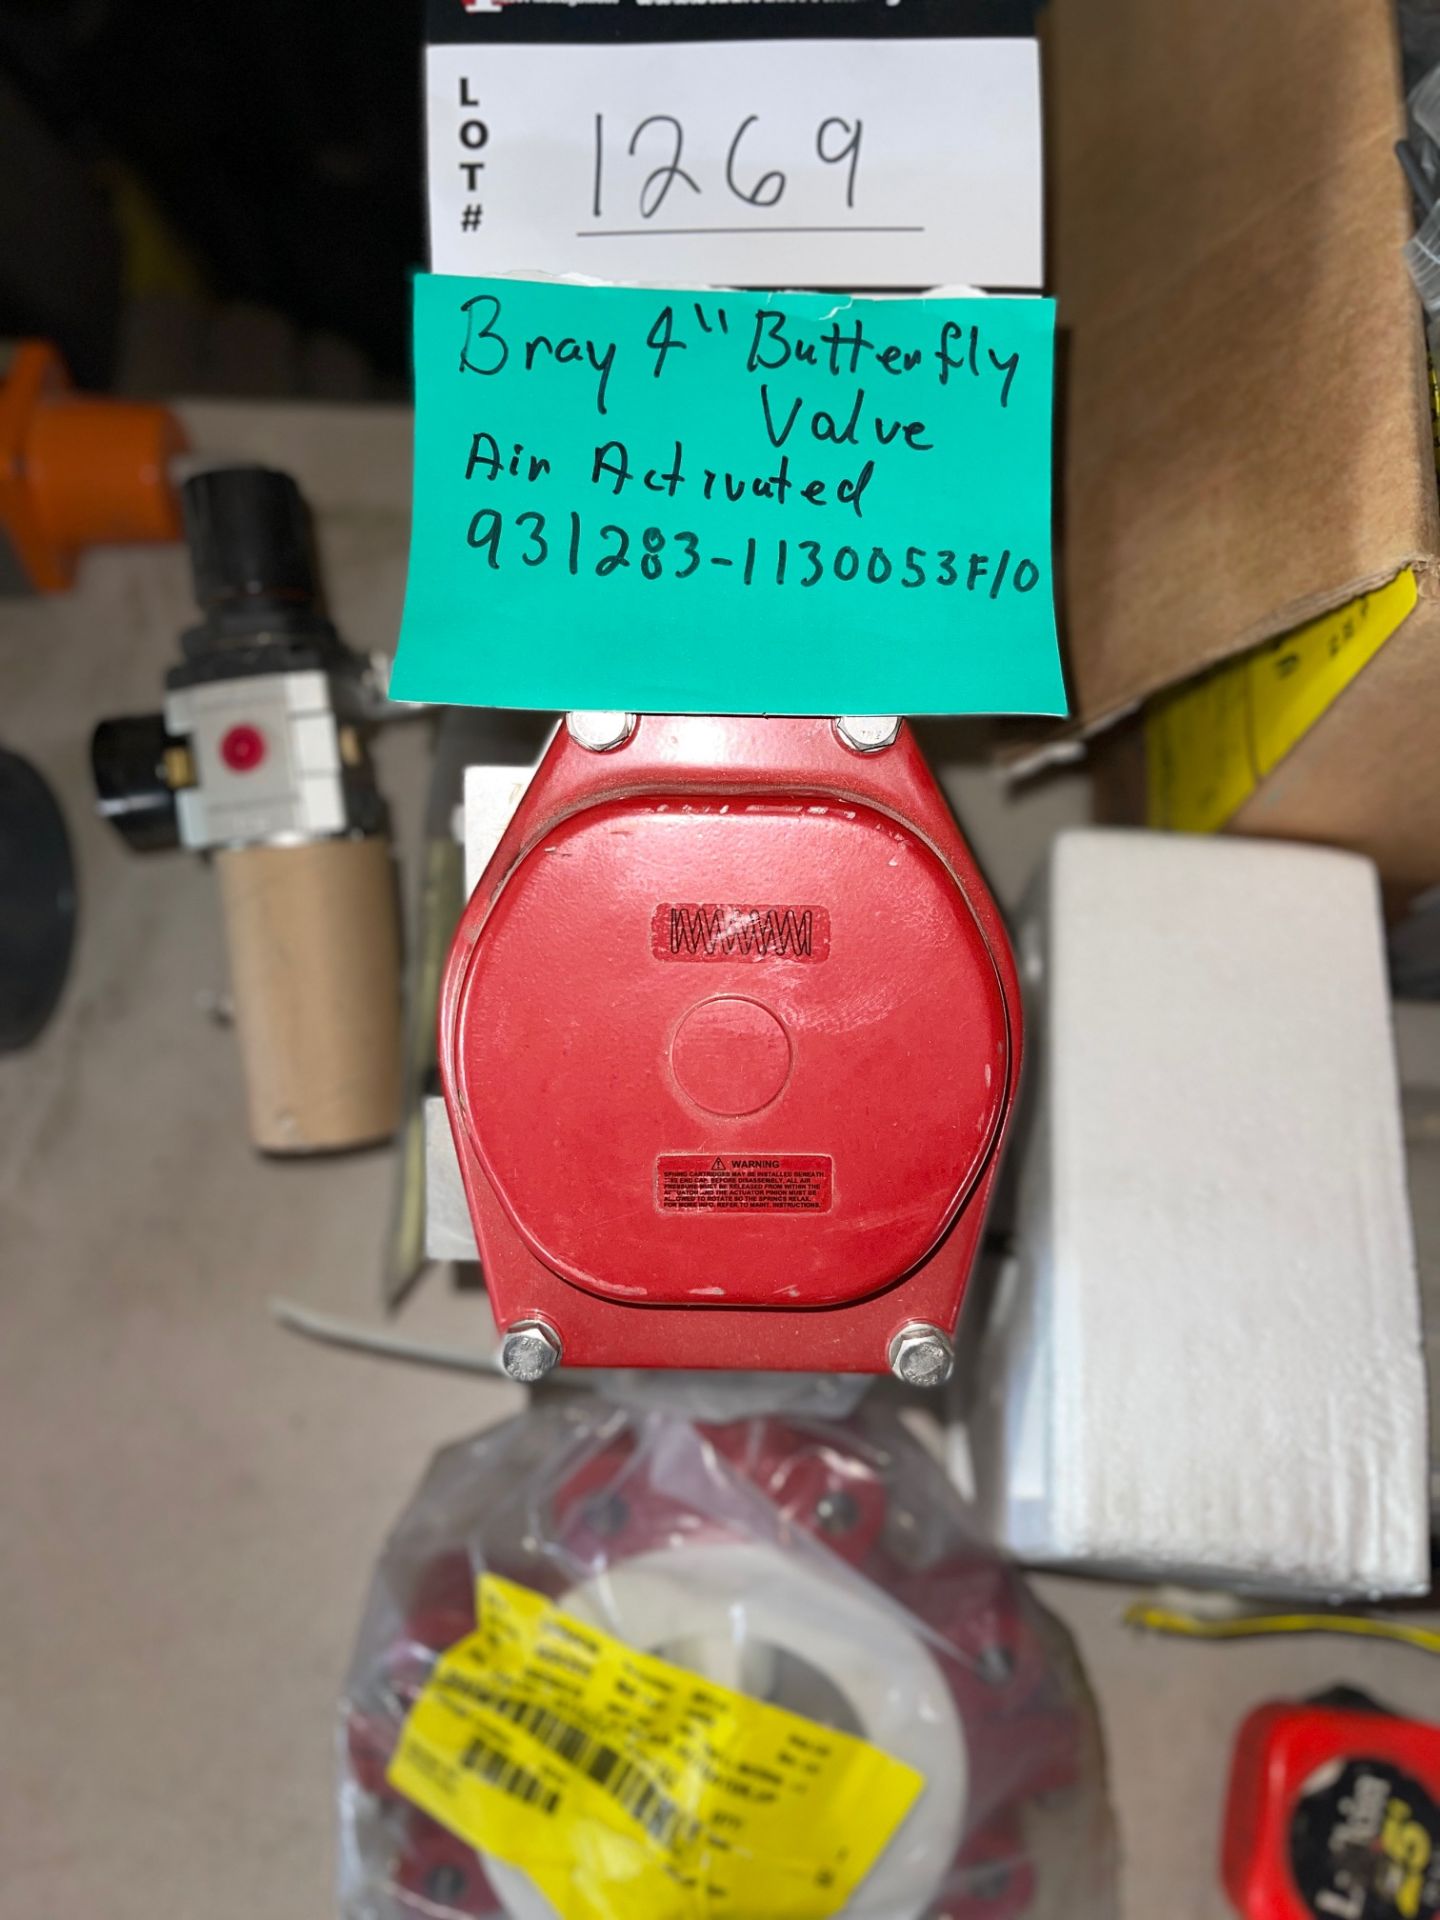 BRAY 4” BUTTERFLY VALVE, AIR ACTIVATED, 931283-1130053F/0 - Image 2 of 2